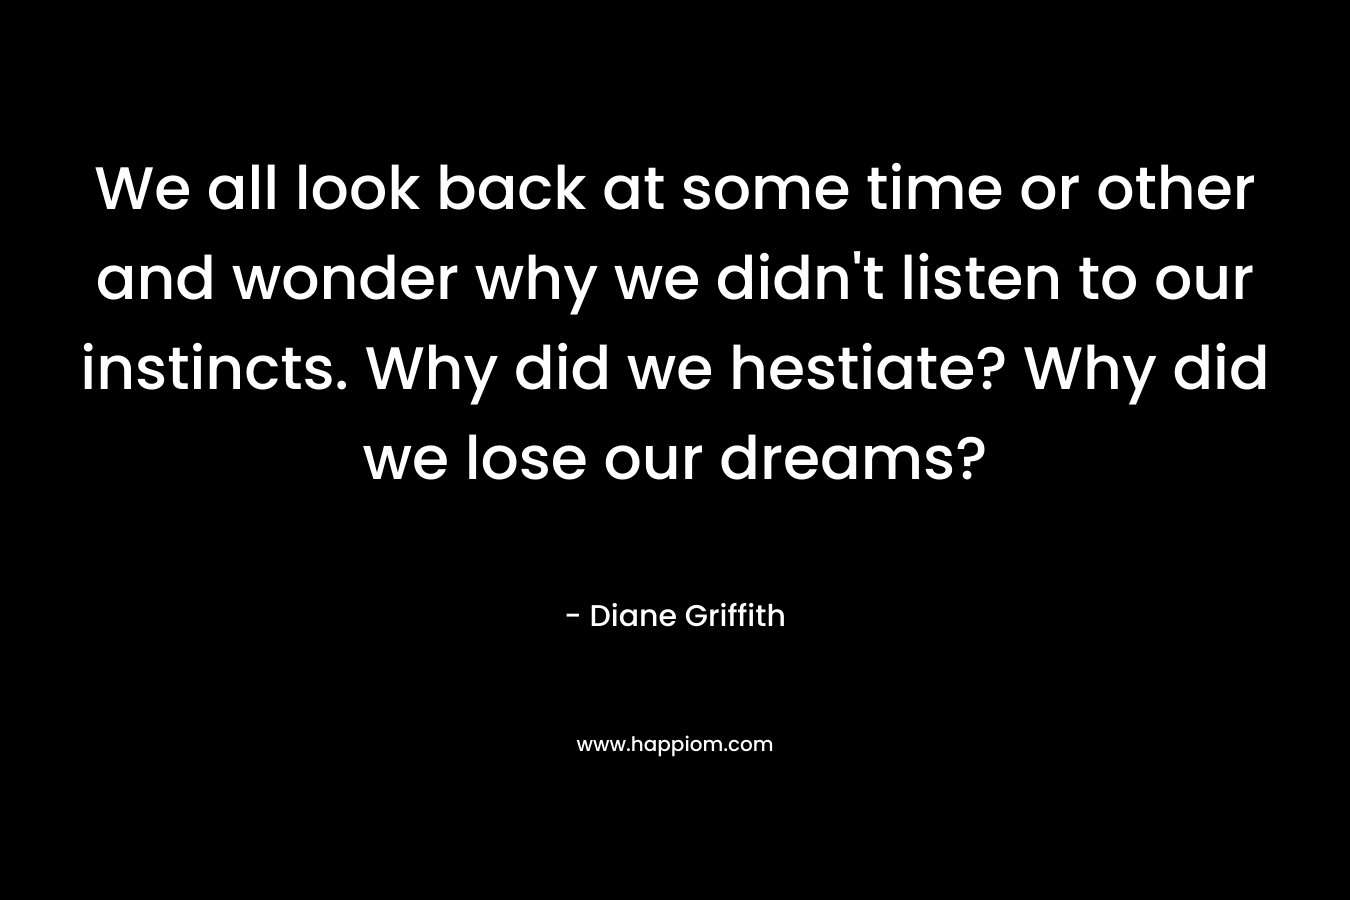 We all look back at some time or other and wonder why we didn't listen to our instincts. Why did we hestiate? Why did we lose our dreams?